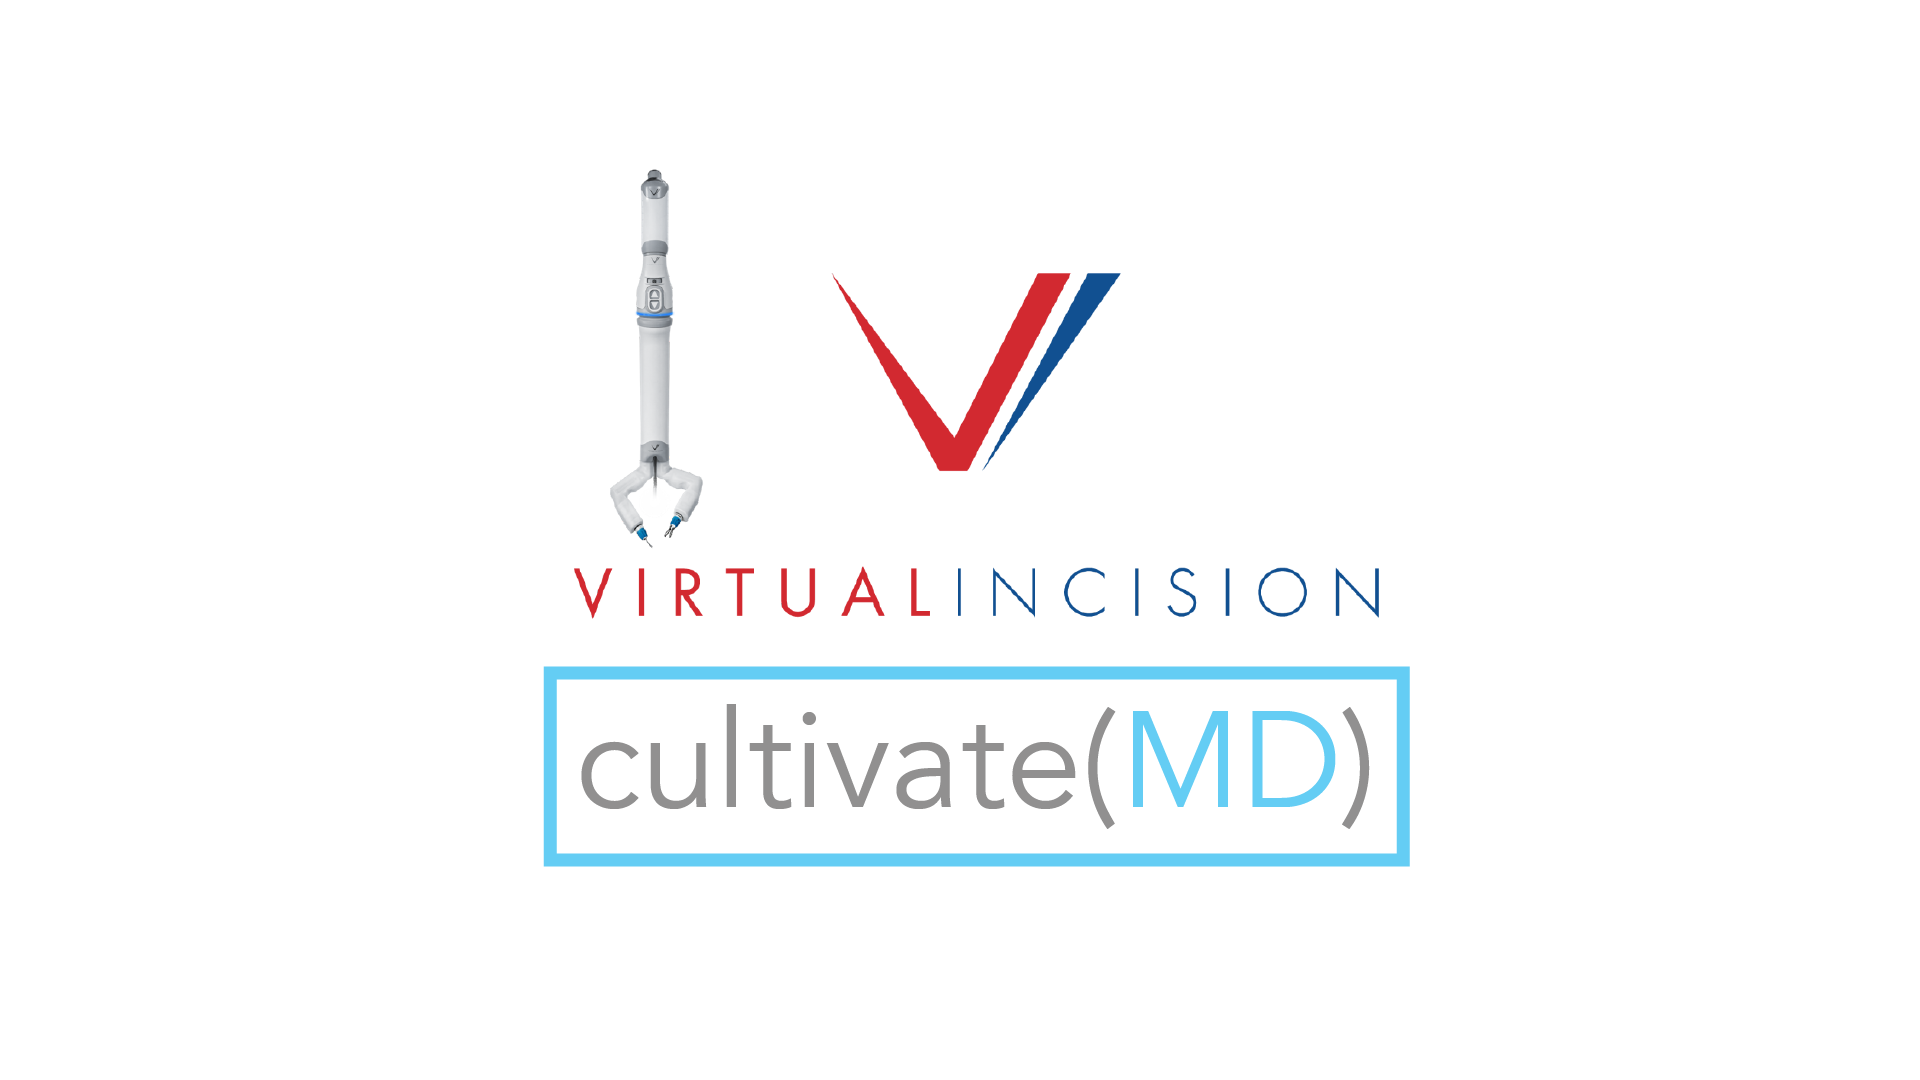 Virtual Incision cultivate(MD)